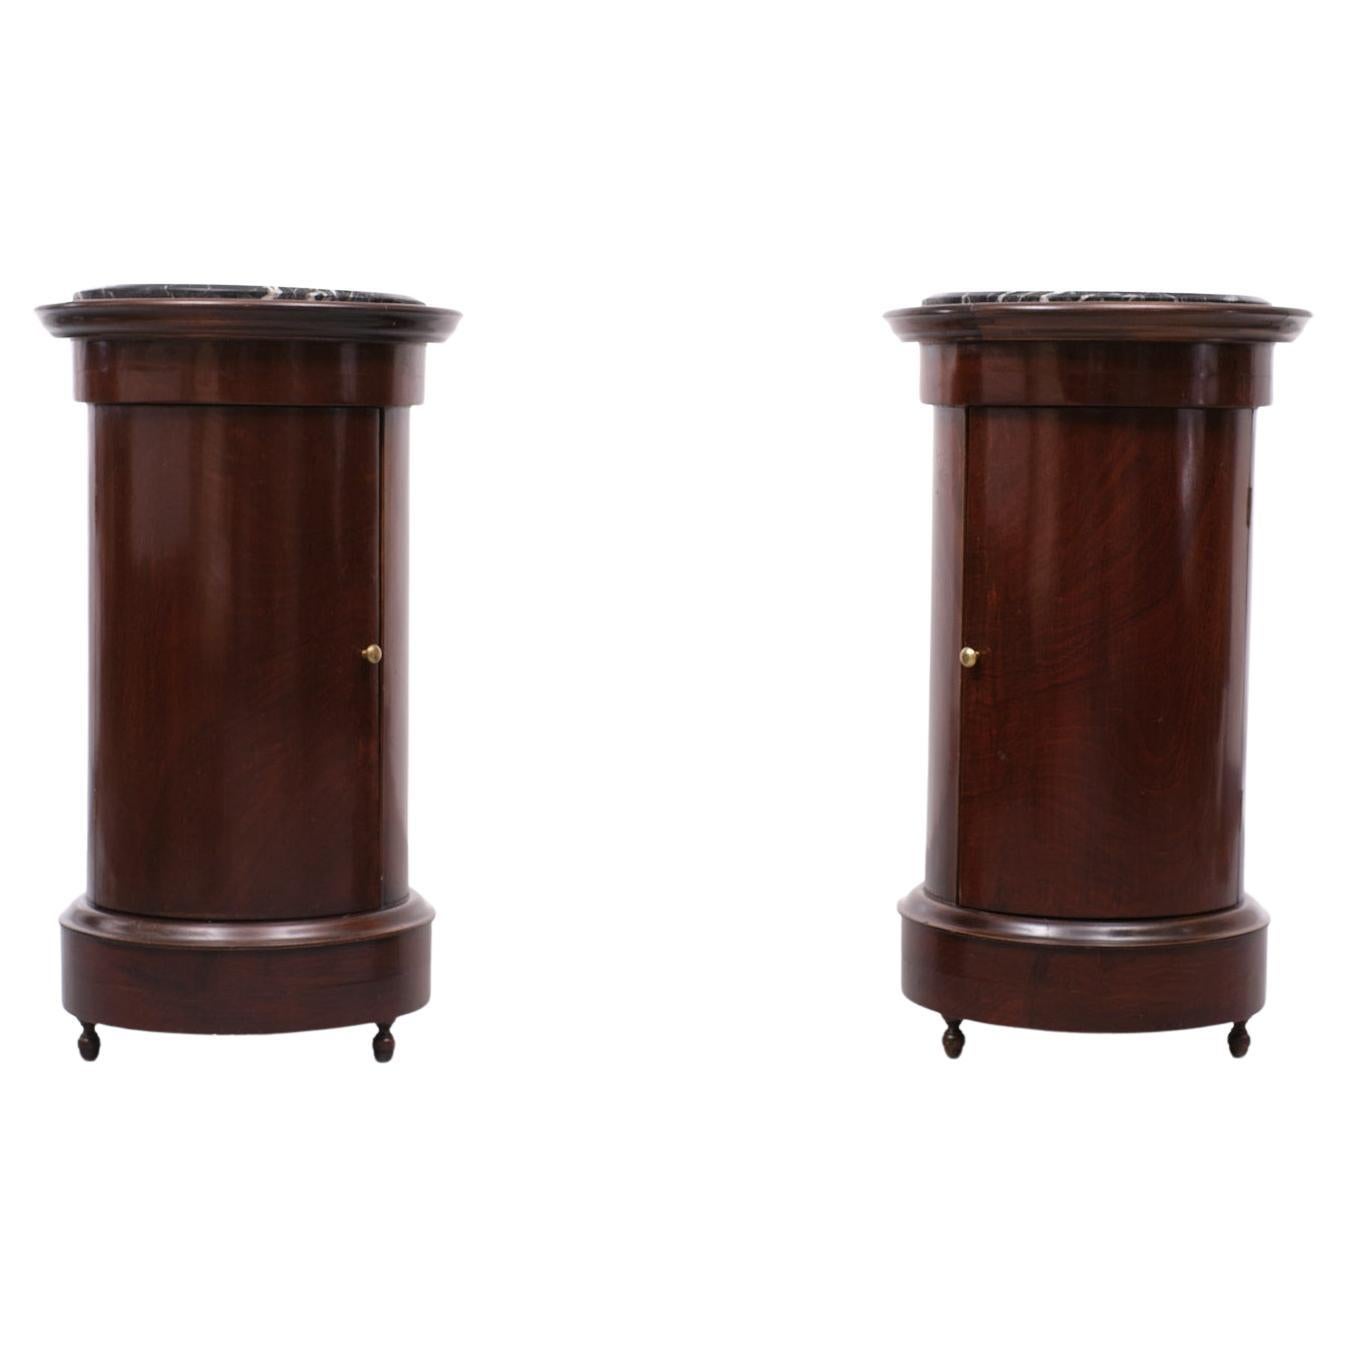 Beautiful and very rare set of Antique cylindrical mahogany nightstands, comes with
veined Black Marble tops. One shelve each, brass knobs. Comes in a warm dark Brown Red color. Victorian England 1880s
Overall in a good condition. One repair on